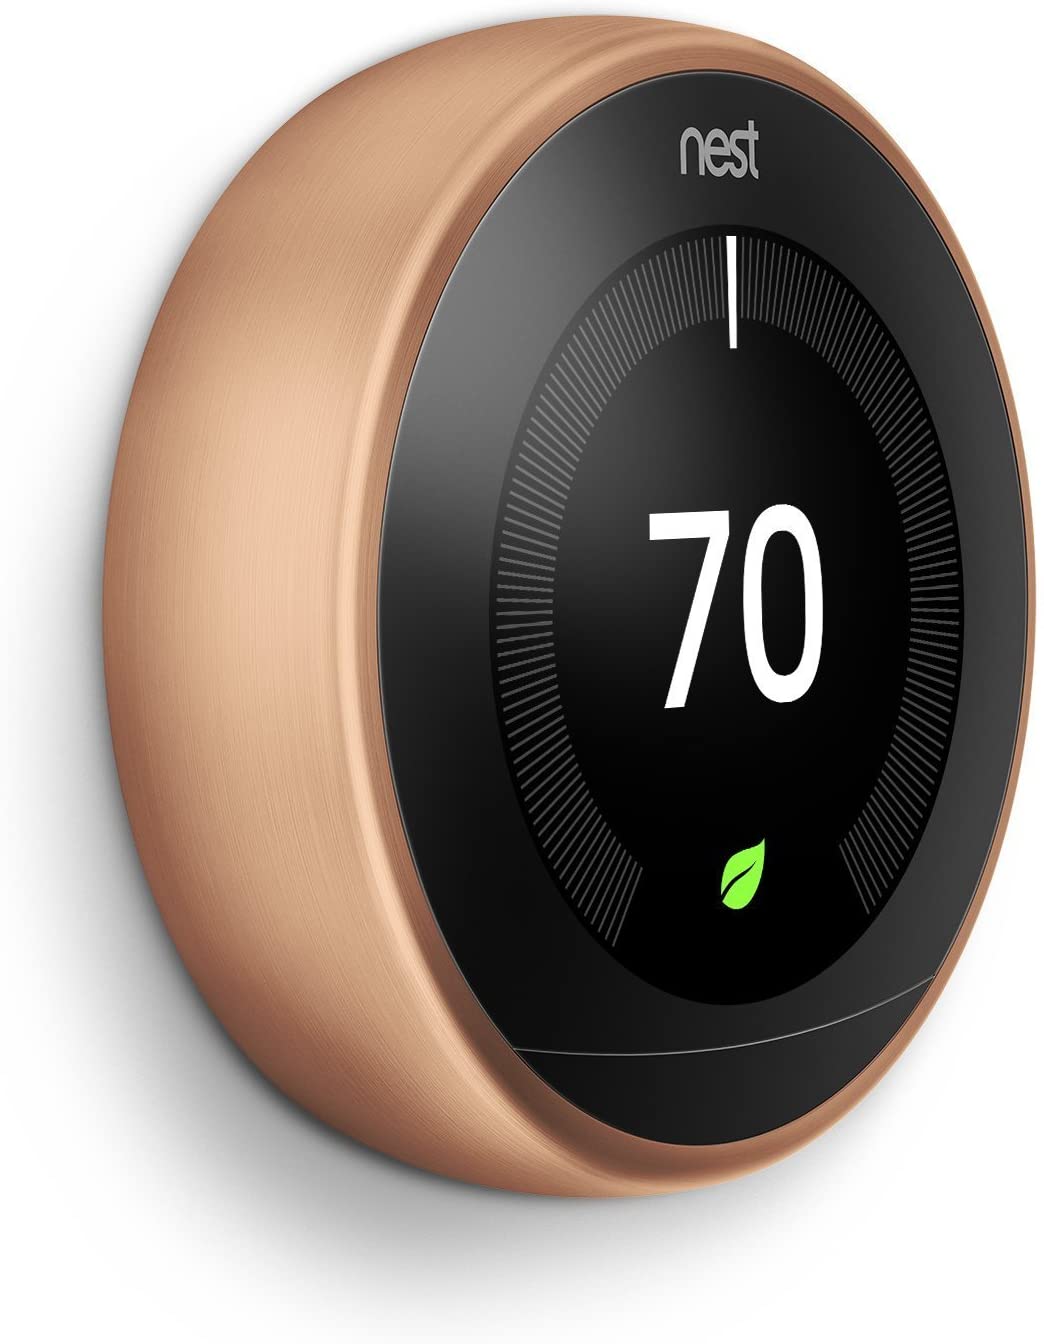 Google Nest GT3021US 3rd Generation Home Learning Programmable Smart Thermostat, Copper